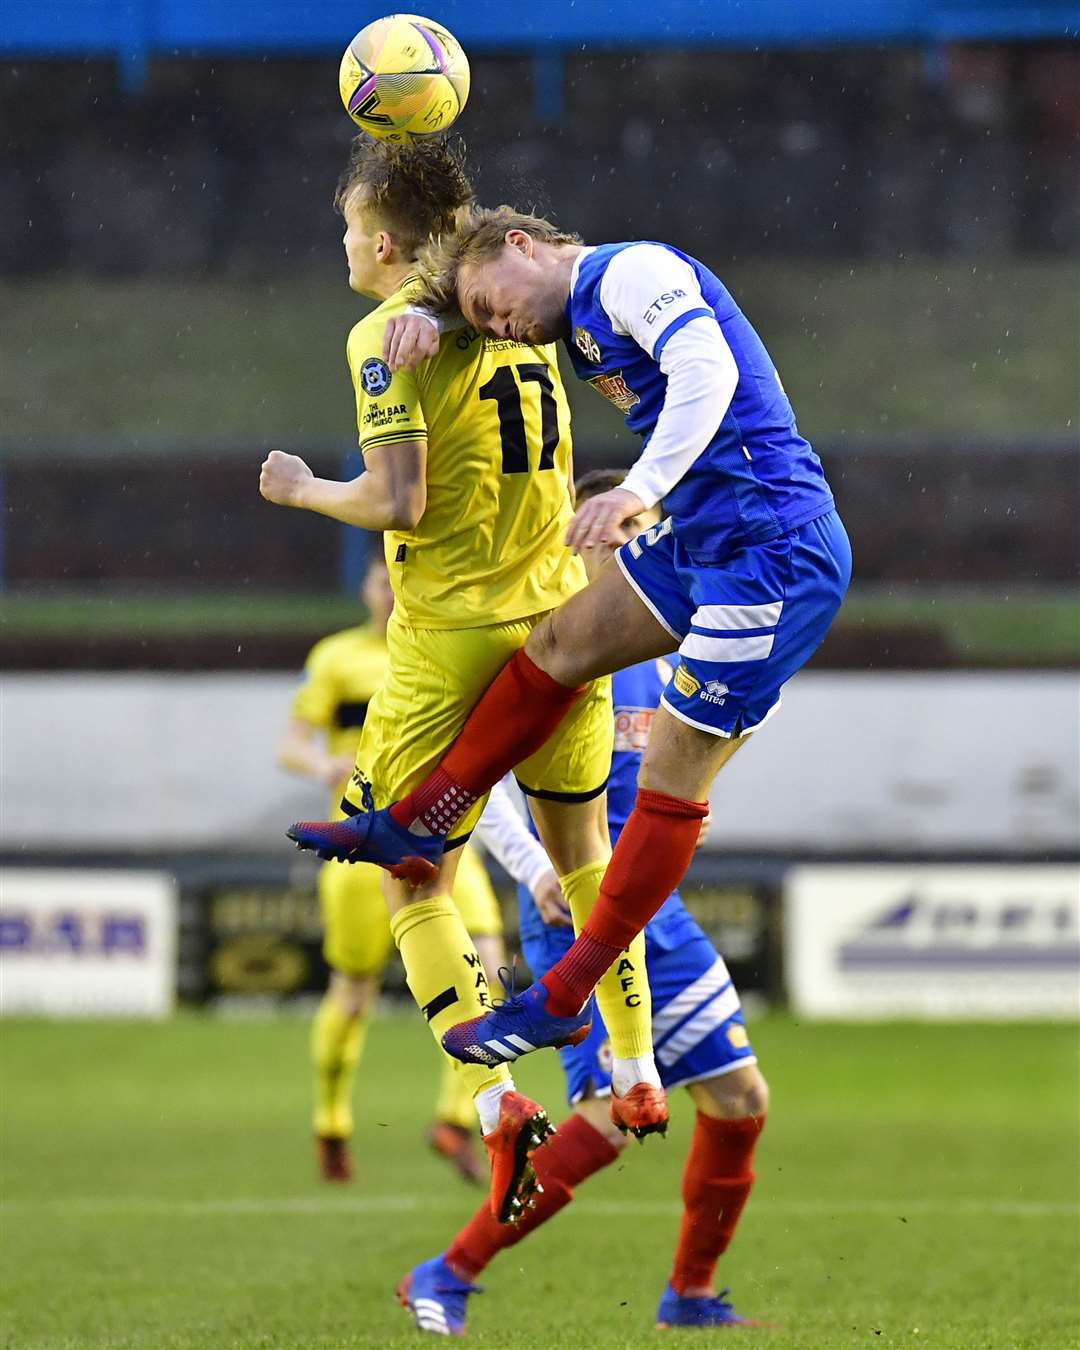 Mark Macadie beats Cowdenbeath's Fraser Mullen in the air. Picture: Mel Roger